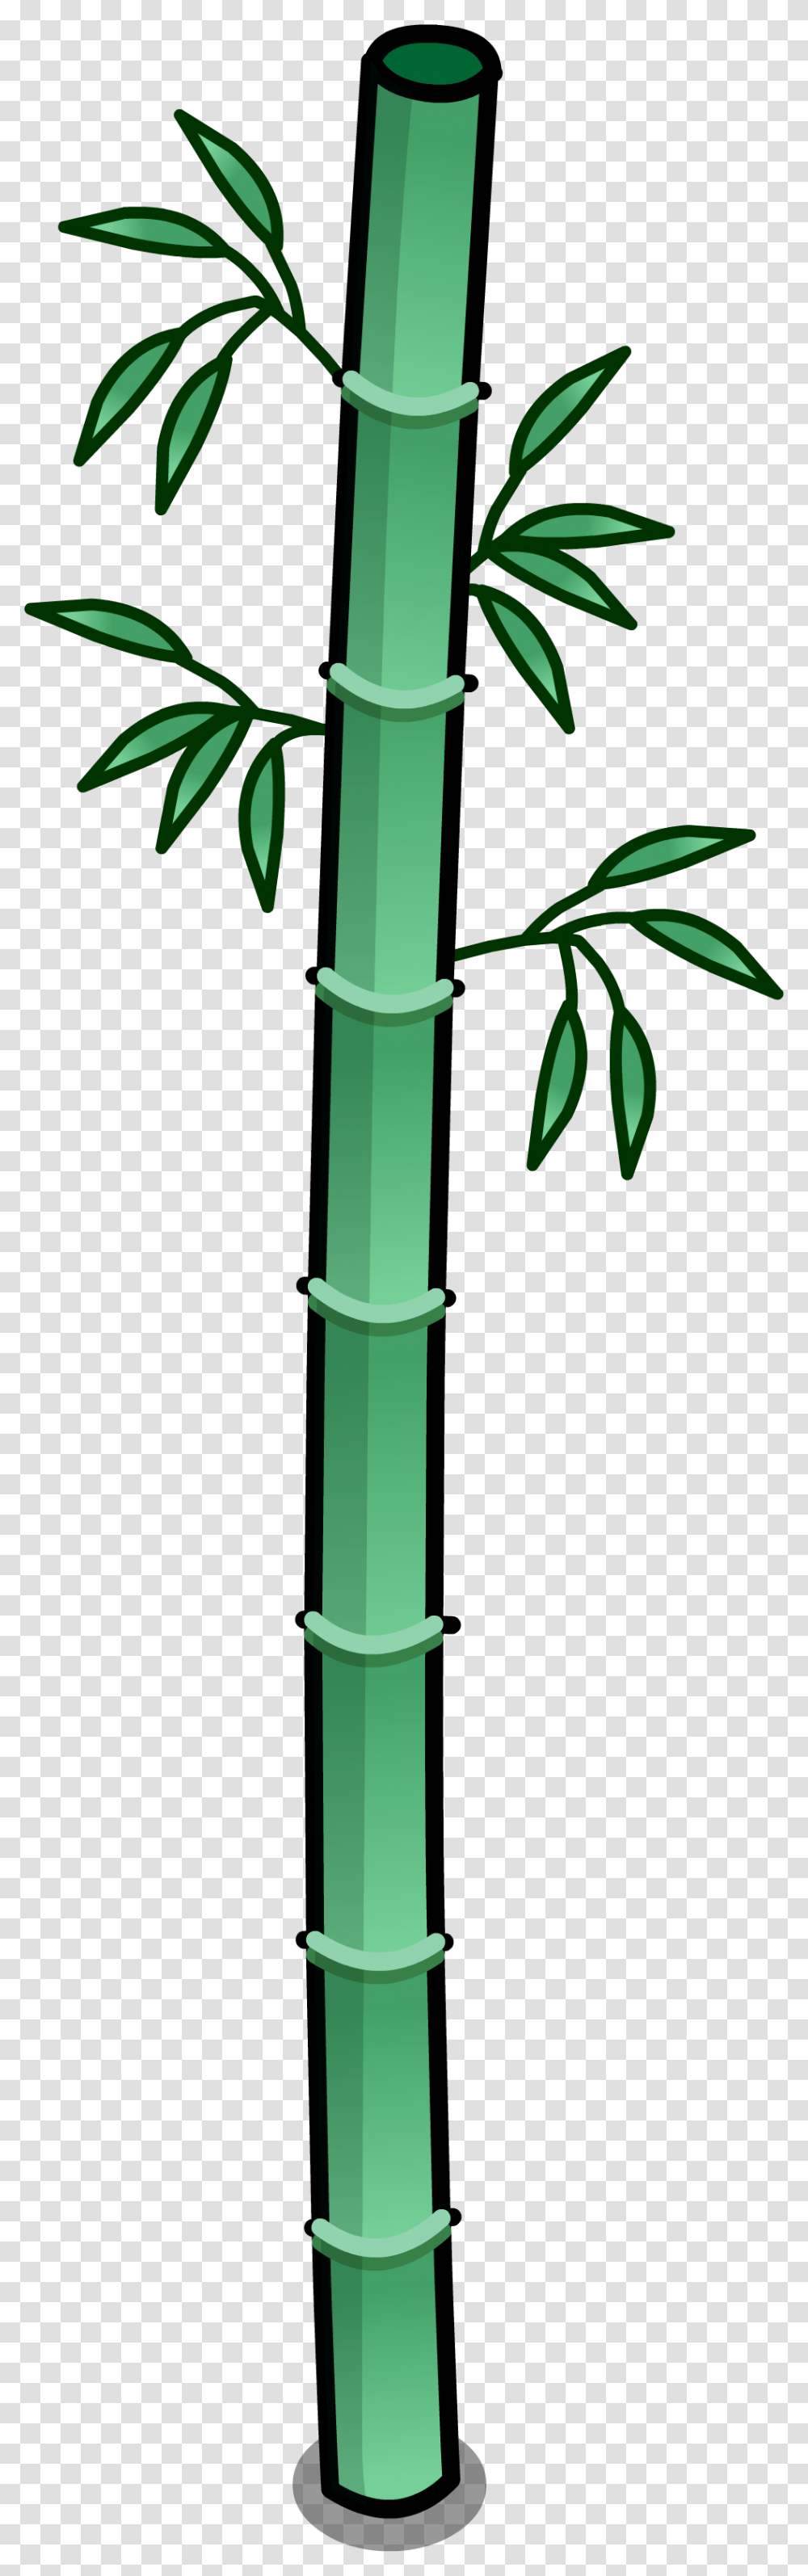 Bamboo Clipart Bamboo Stalk Sprite Bamboo, Plant, Sword, Blade, Weapon Transparent Png